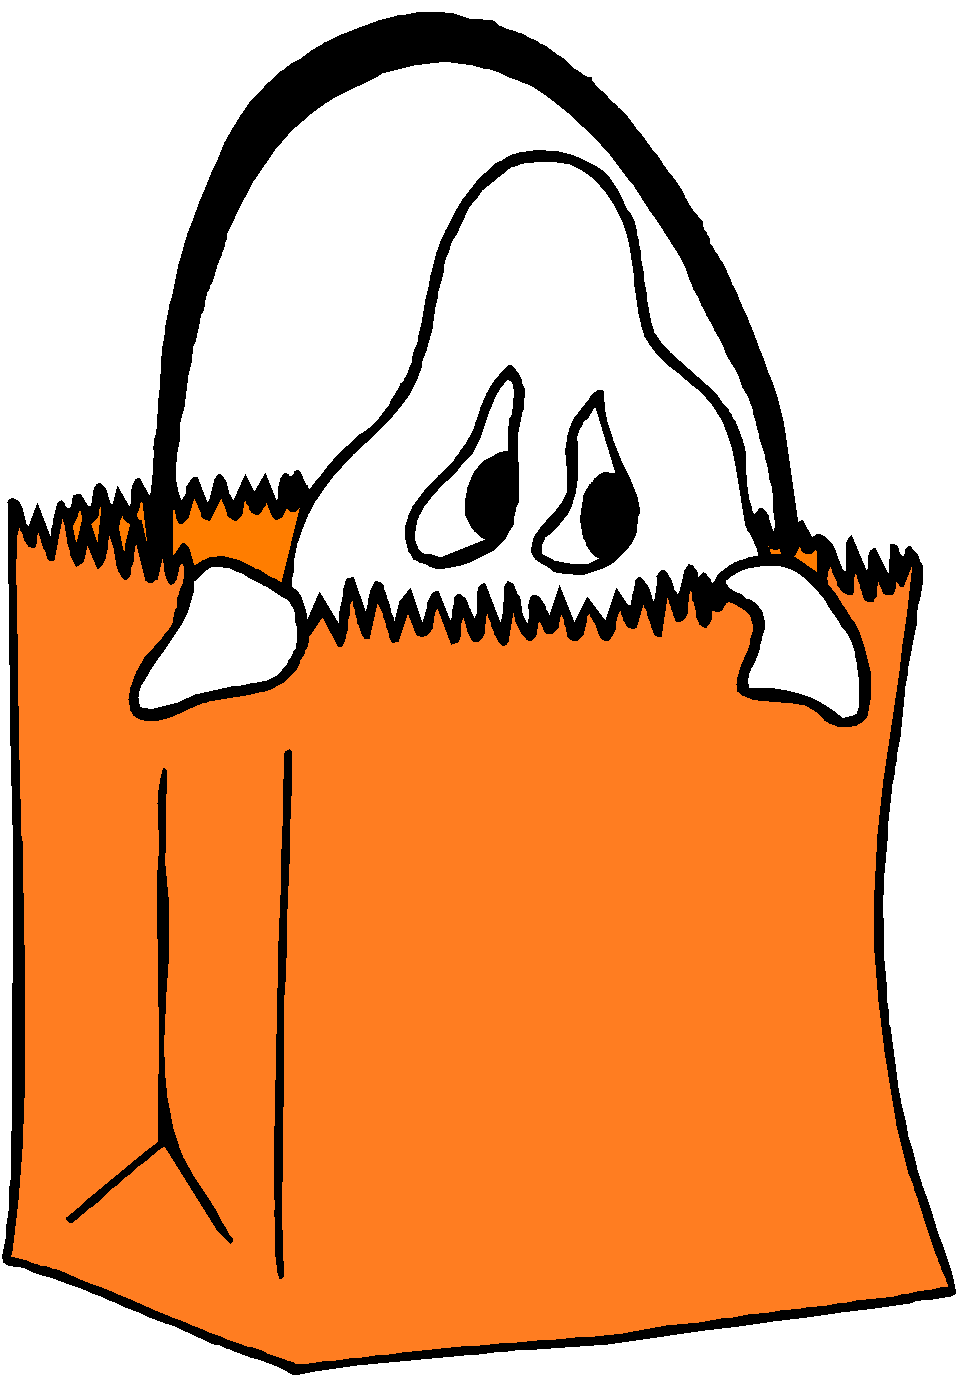 Clipart ghost october. Fatal foodies poo